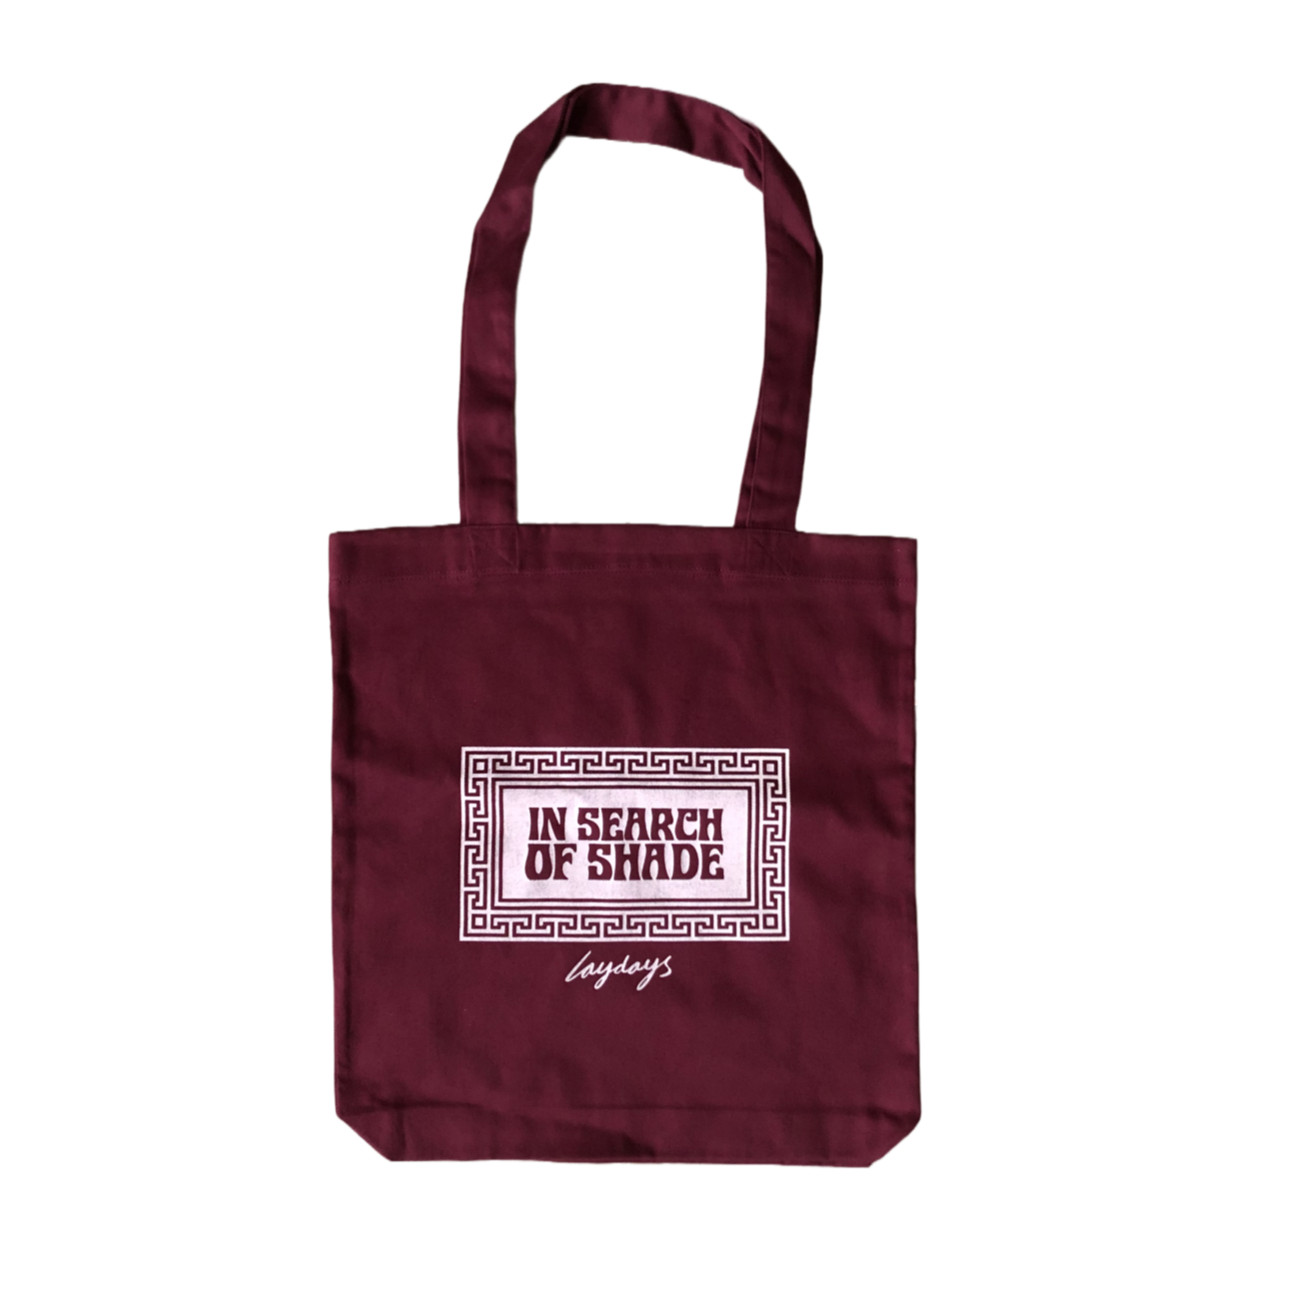 In Search Of Shade cotton tote Burgundy